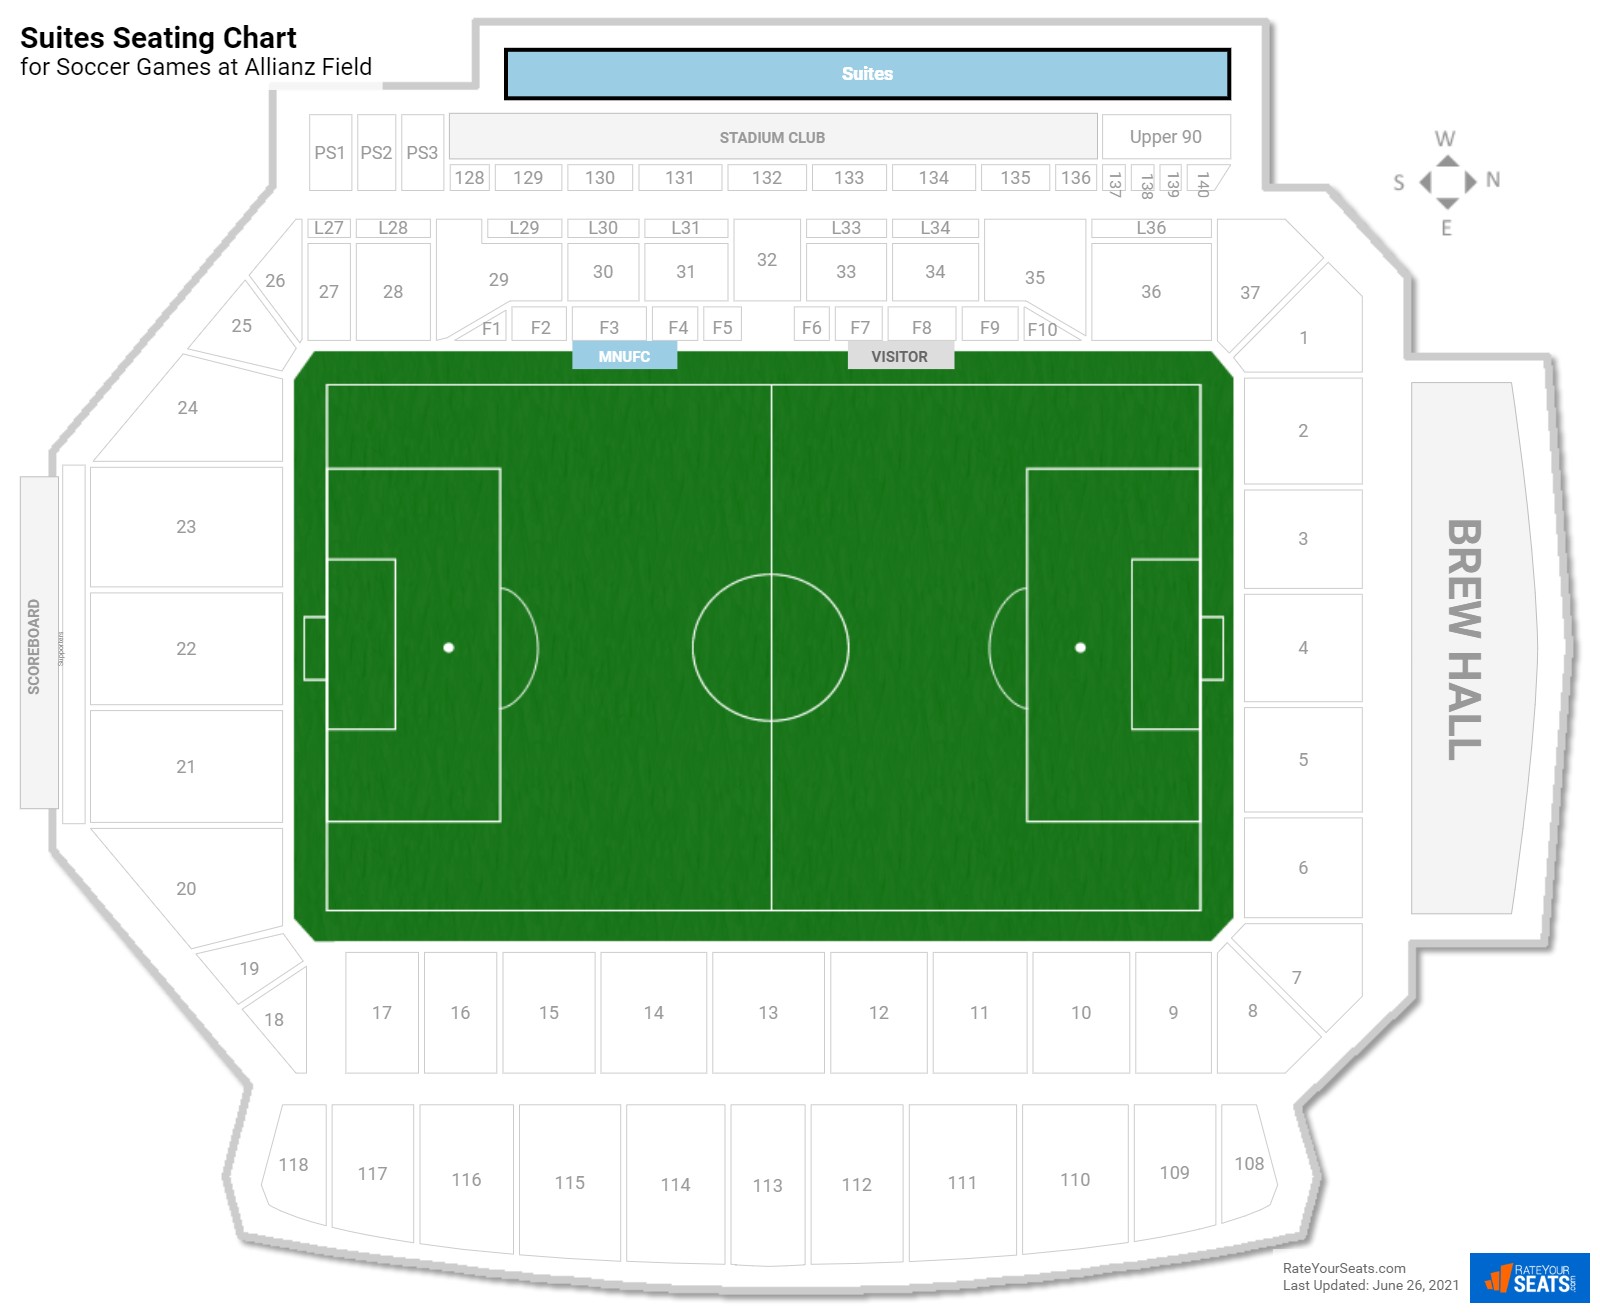 Soccer Suites Seating Chart at Allianz Field